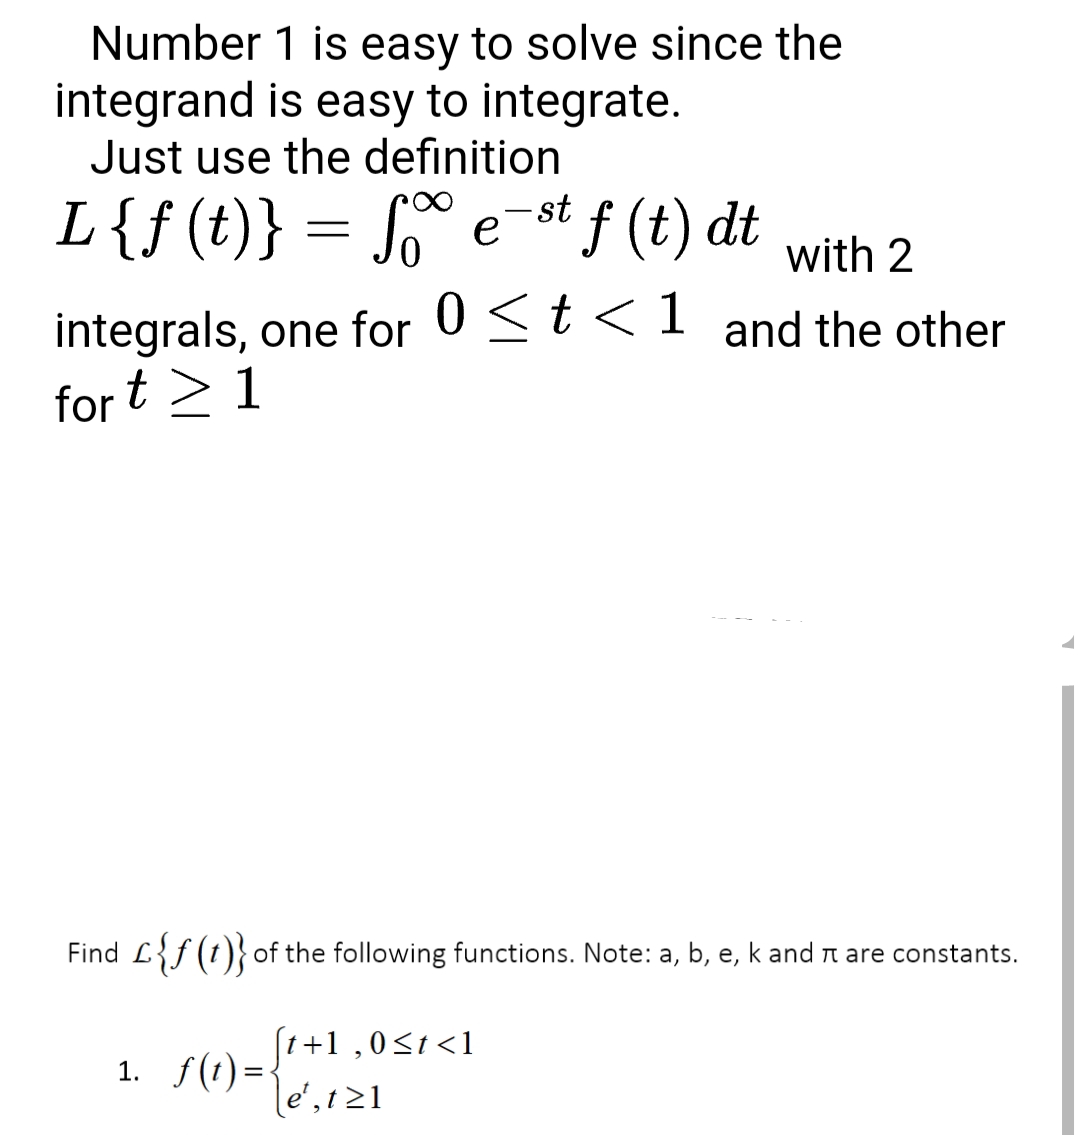 Number 1 is easy to solve since the
integrand is easy to integrate.
Just use the definition
L{f(t)} = S° e-st f (t) dt
е
with 2
integrals, one for 0St<1 and the other
for
t> 1
Find L{f(t)} of the following functions. Note: a, b, e, k and n are constants.
(1+1 ,0<t <1
1. f(t)=\e',1z1
